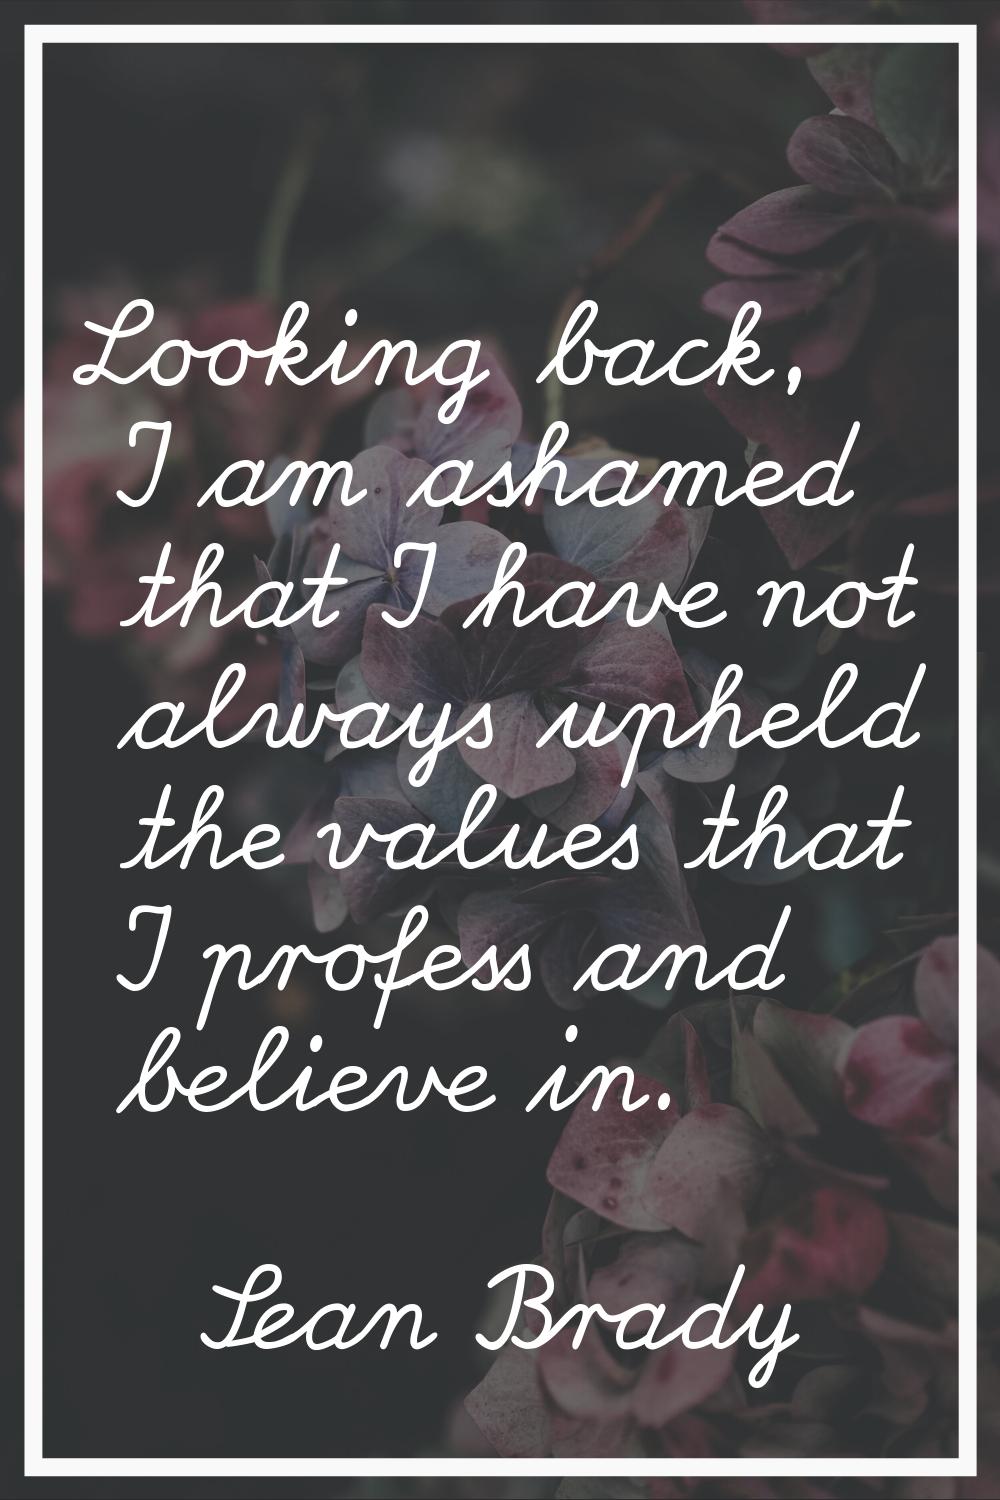 Looking back, I am ashamed that I have not always upheld the values that I profess and believe in.